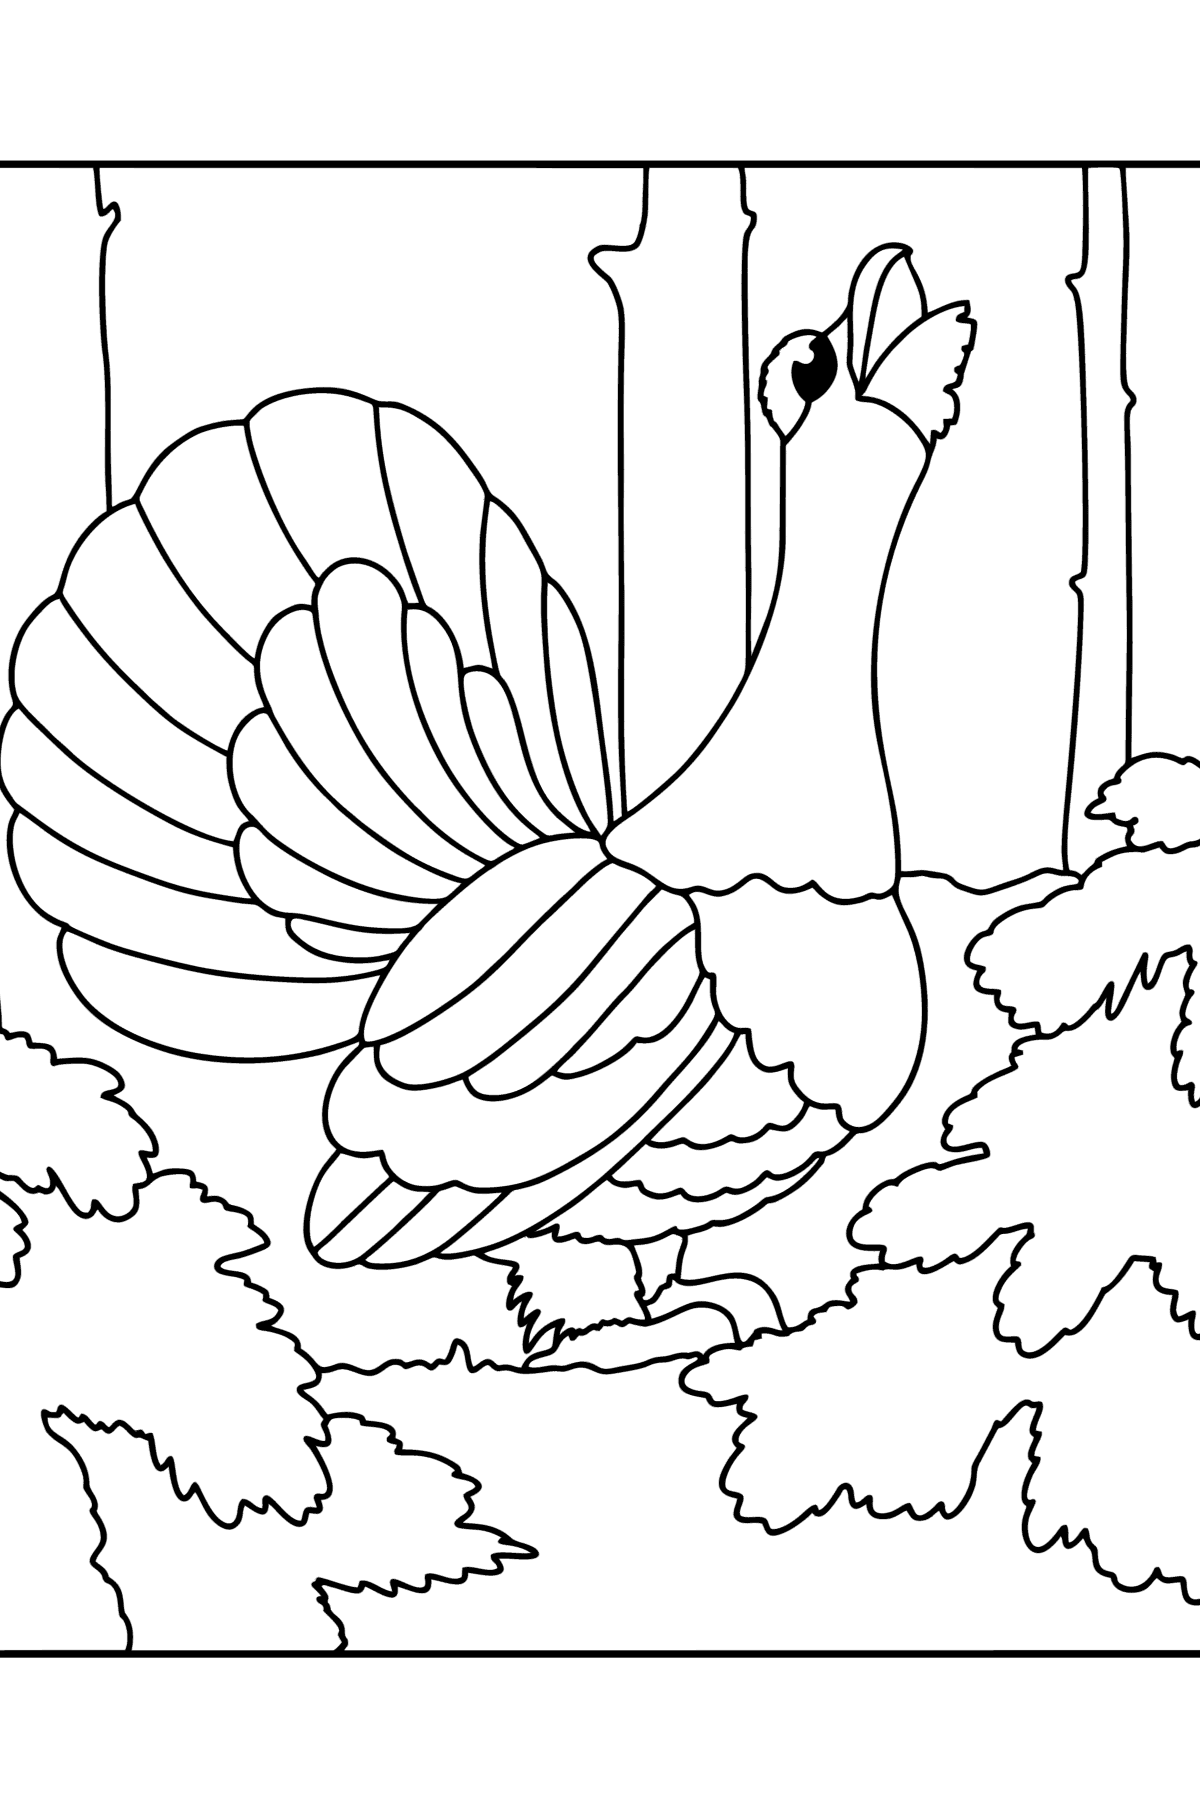 Capercaillie in the forest сoloring page - Coloring Pages for Kids